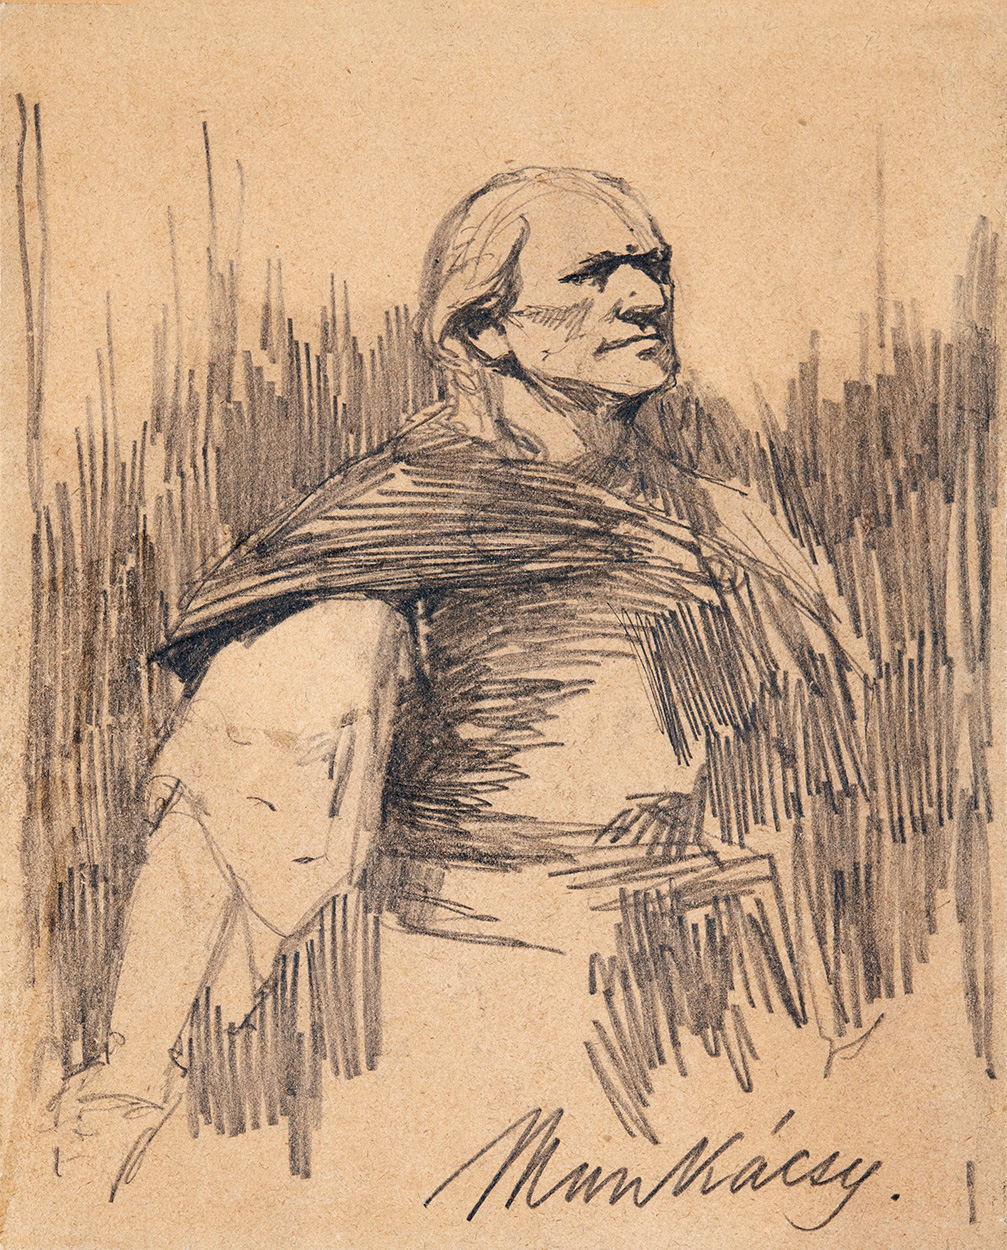 Munkácsy Mihály (1844-1900) Study for the Hungarian Conquest, around 1892-1893